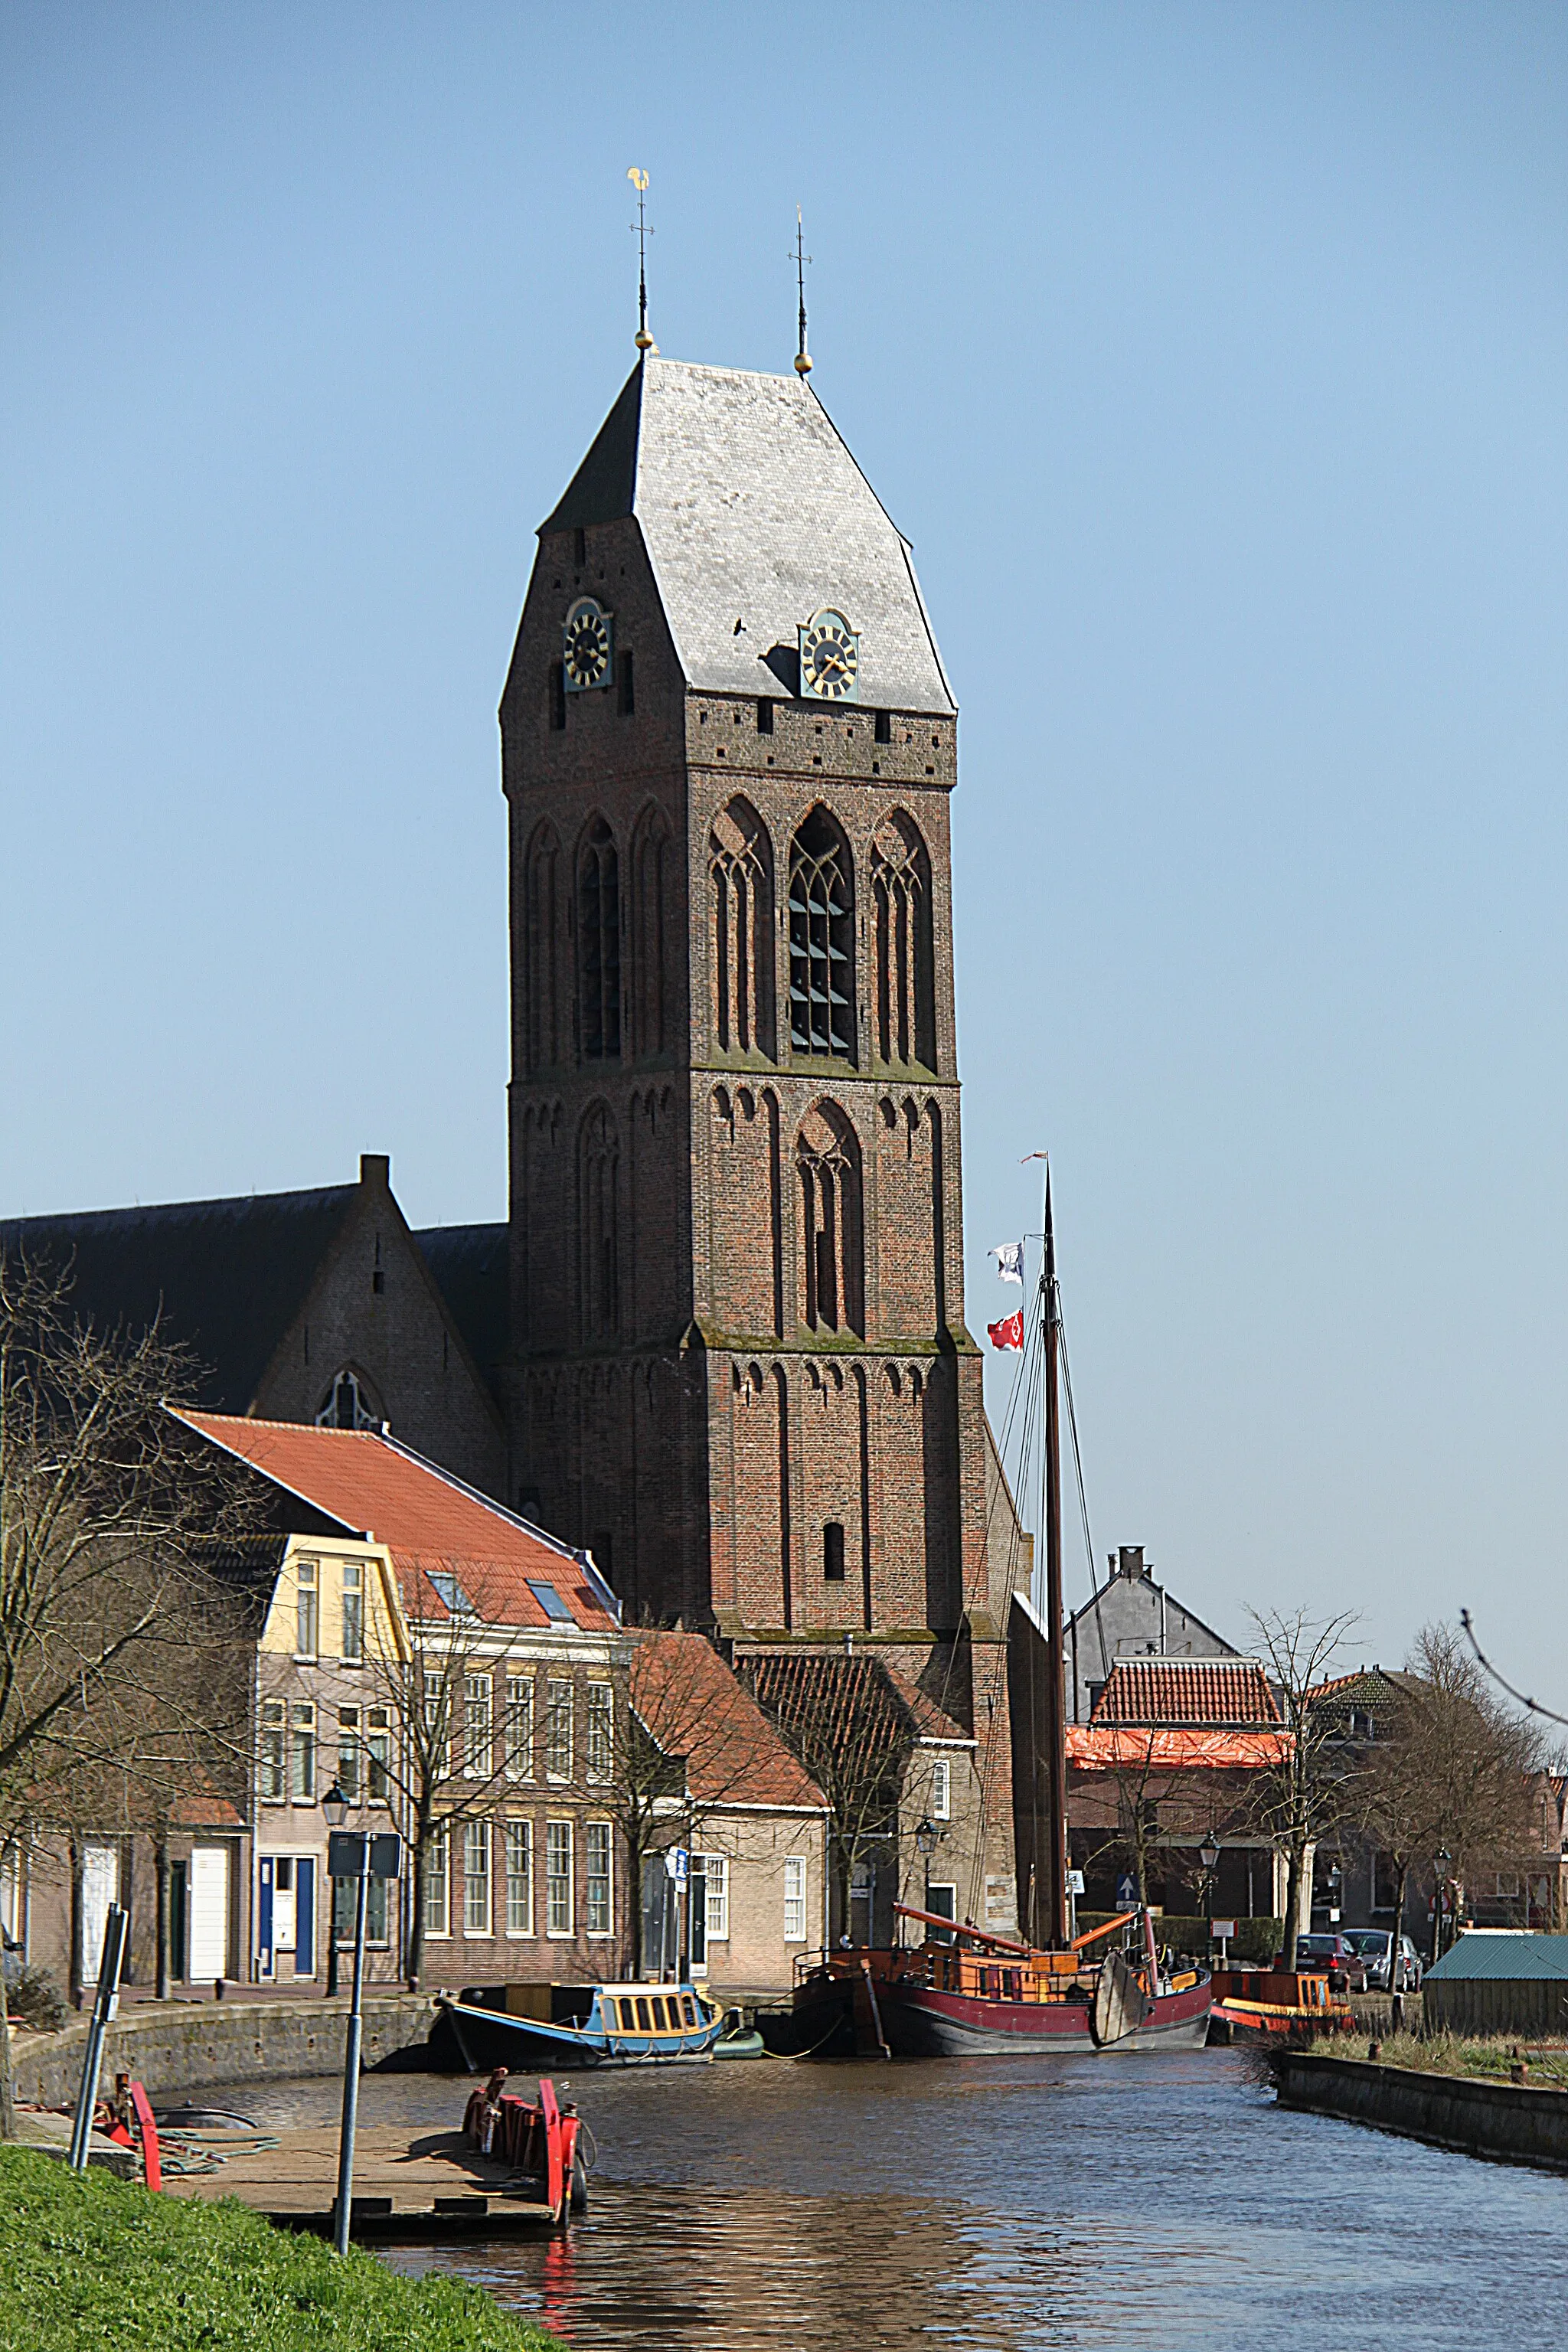 Photo showing: Tower of the Church of St. Michael at Oudewater in the Netherlands, a building that dates back to the 14th century.